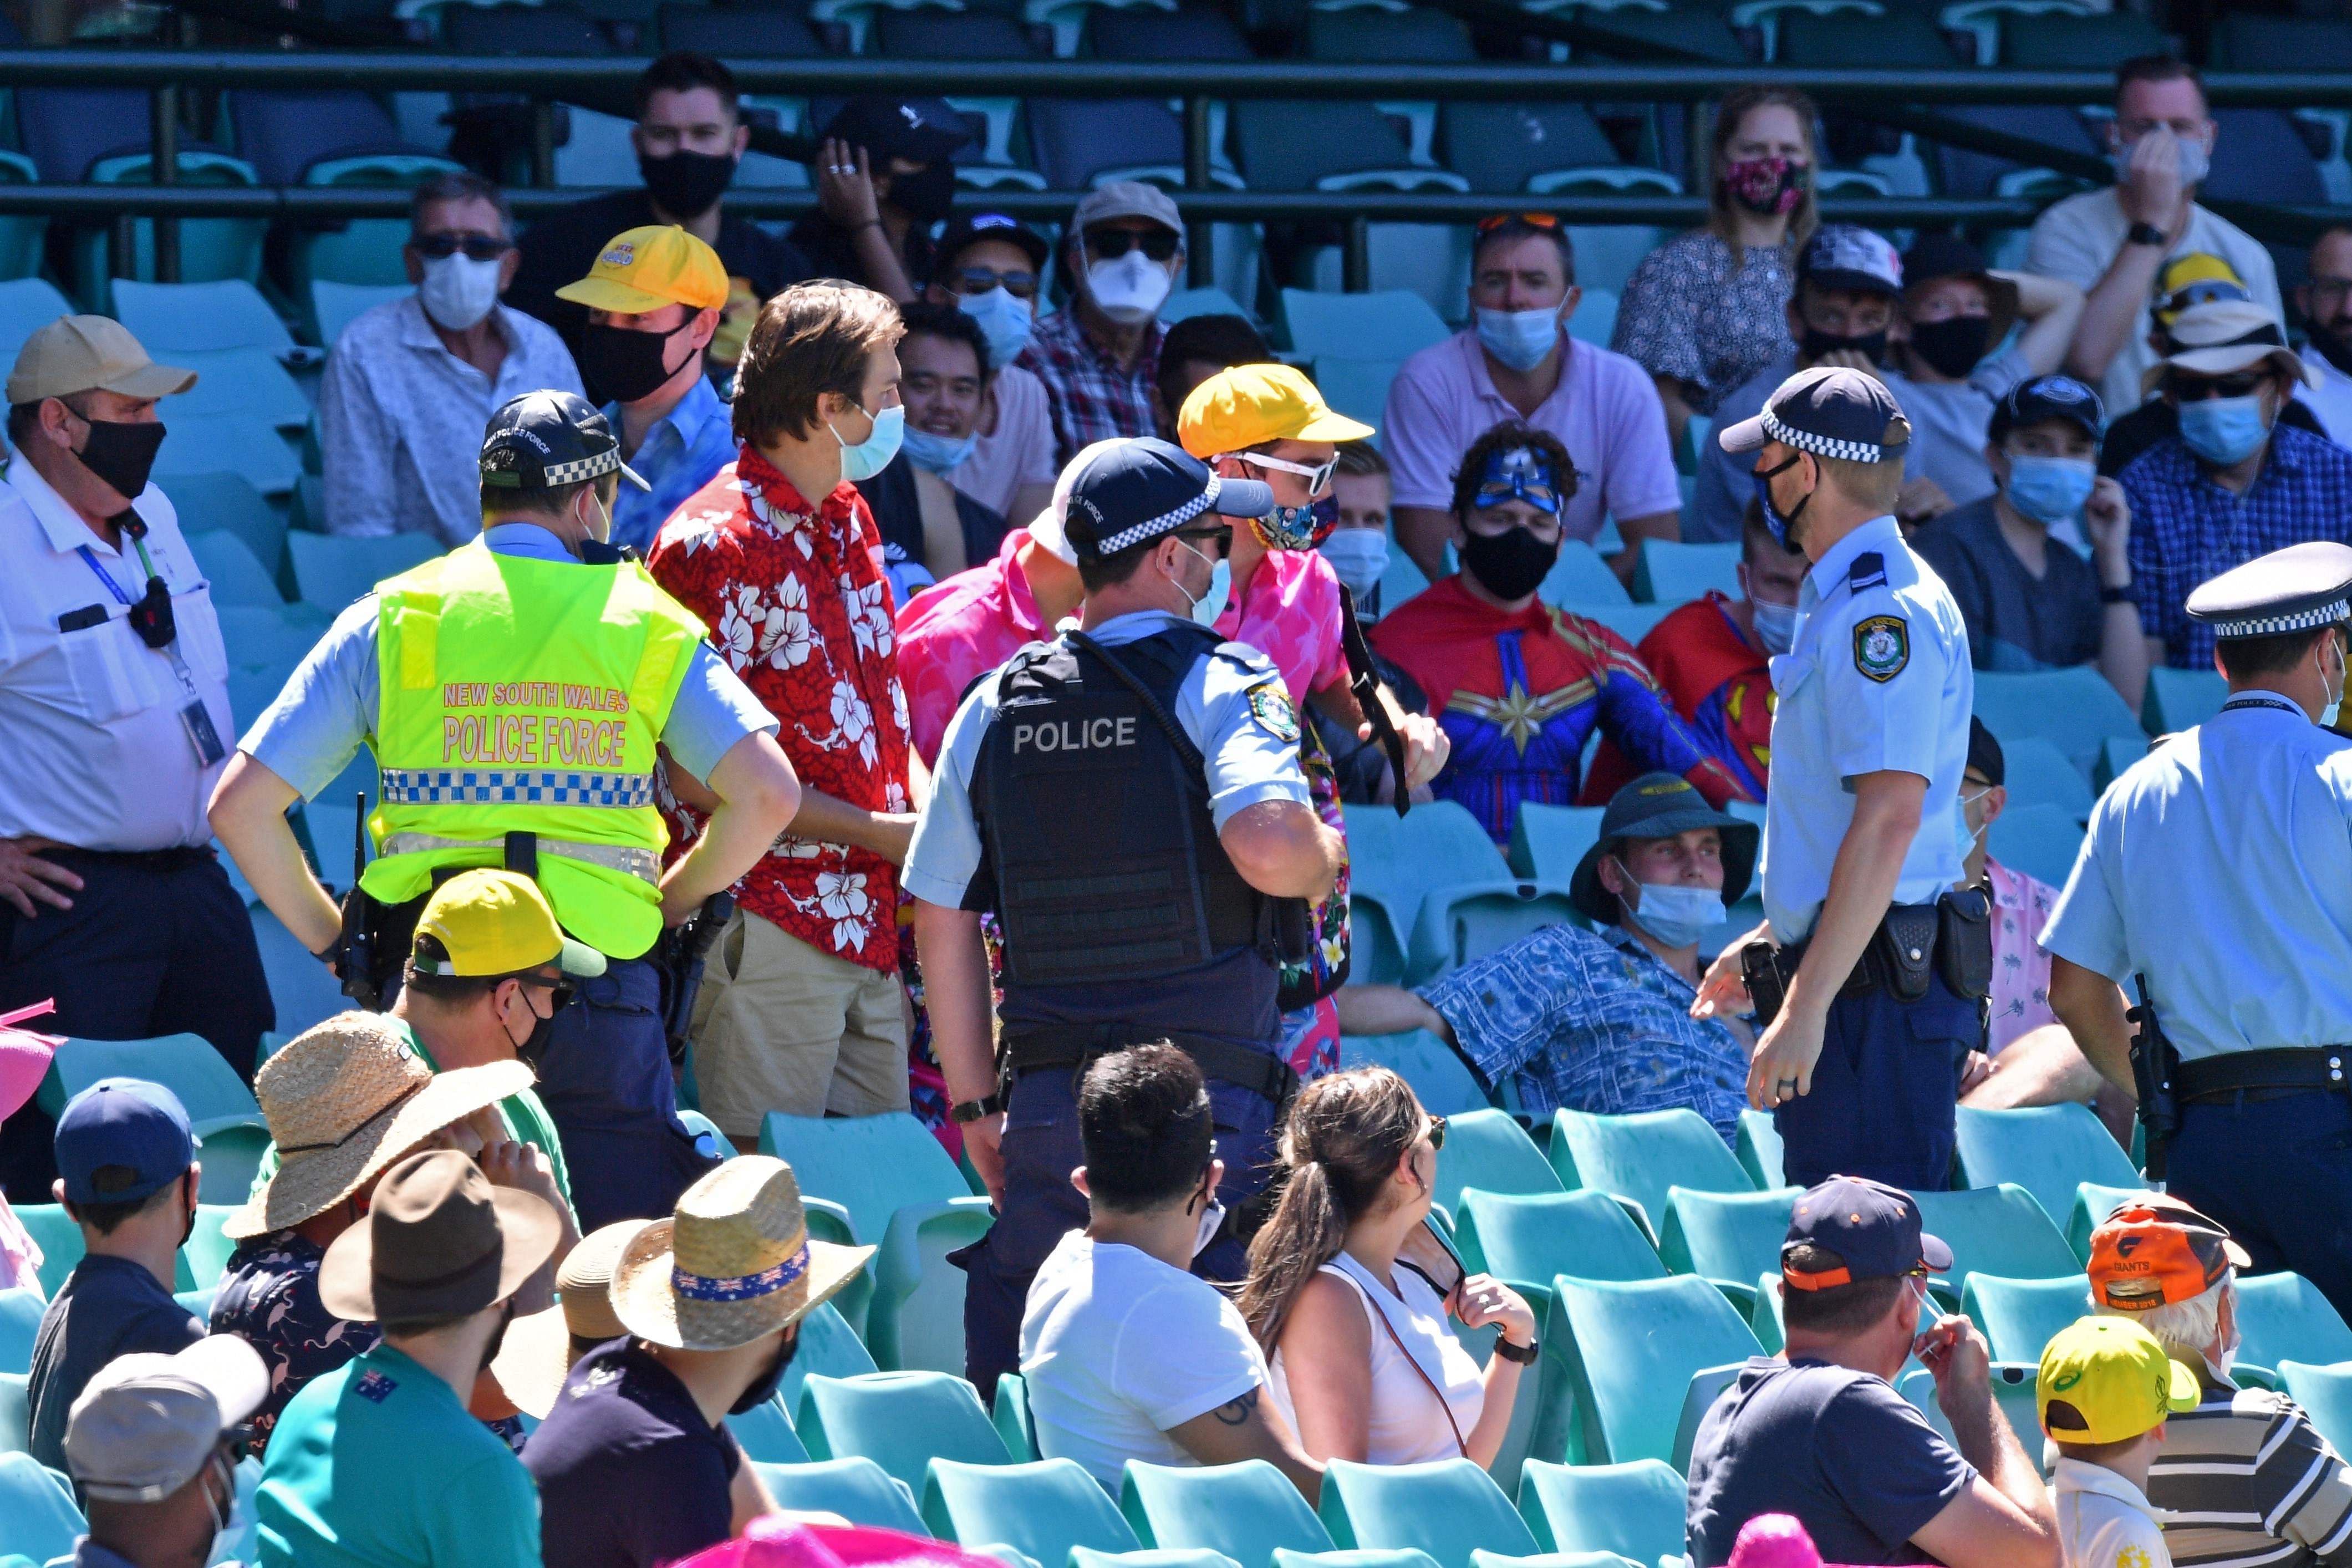 Police speaking to spectators as the game was halted after allegedly some remarks were made by the spectators on the fourth day of the third cricket Test match between Australia and India at the Sydney Cricket Ground (SCG) in Sydney on Jan 10, 2021. - The alleged racist abuse of Indian players by fans at the third Test in Sydney on January 10, 2021 is just the latest in a litany of similar incidents to mar sport in Australia, with authorities struggling to stamp out the problem. Credit: AFP